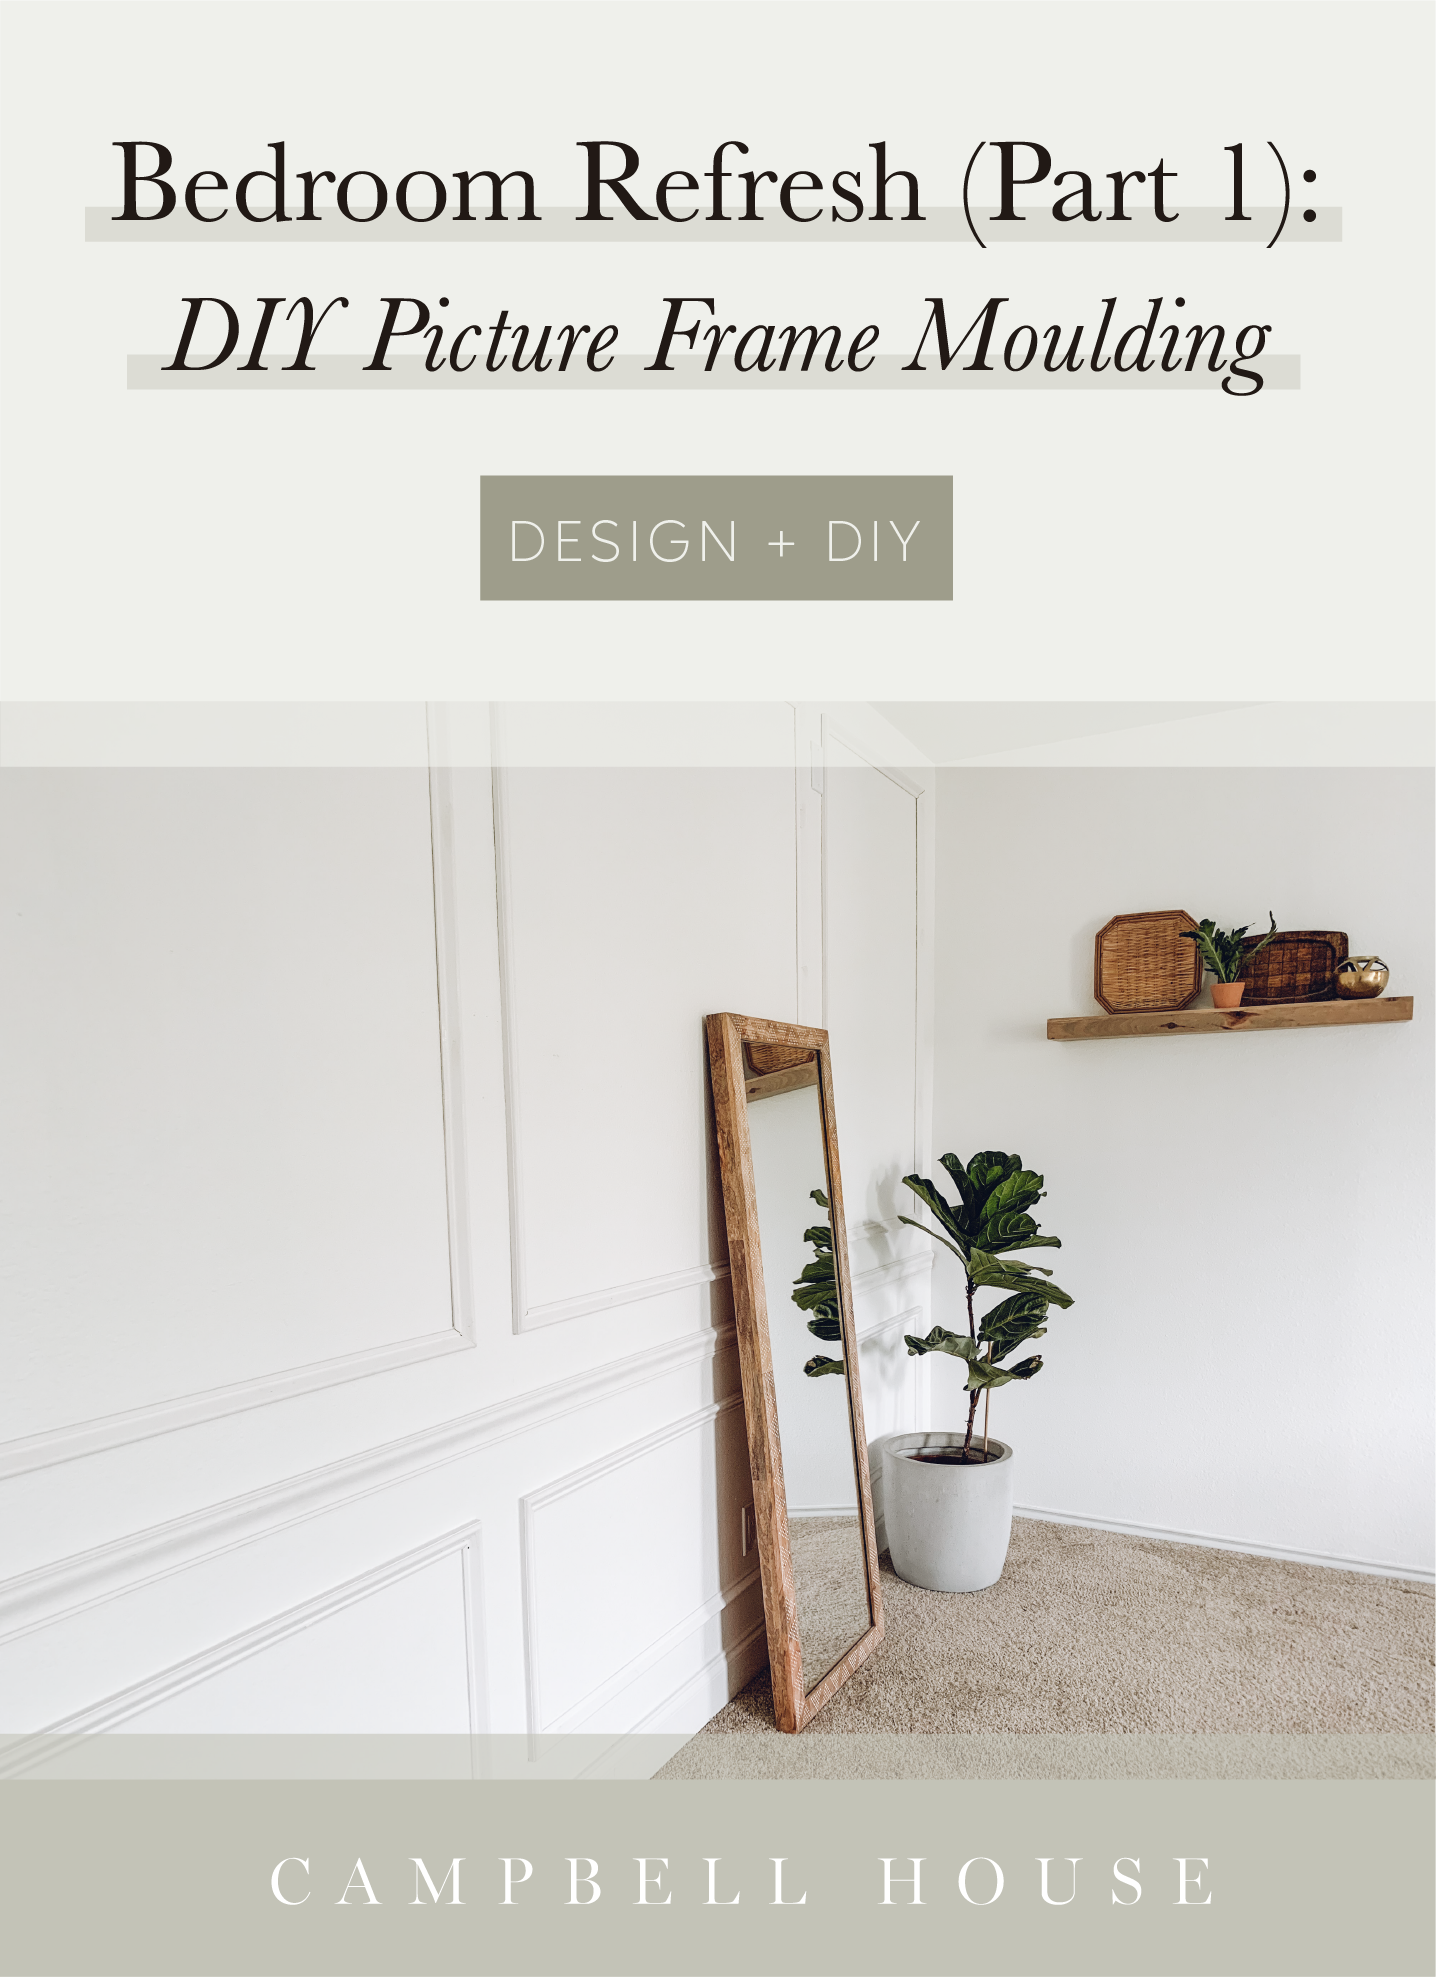 How to install picture frame molding : easy DIY project - Christina Maria  Blog